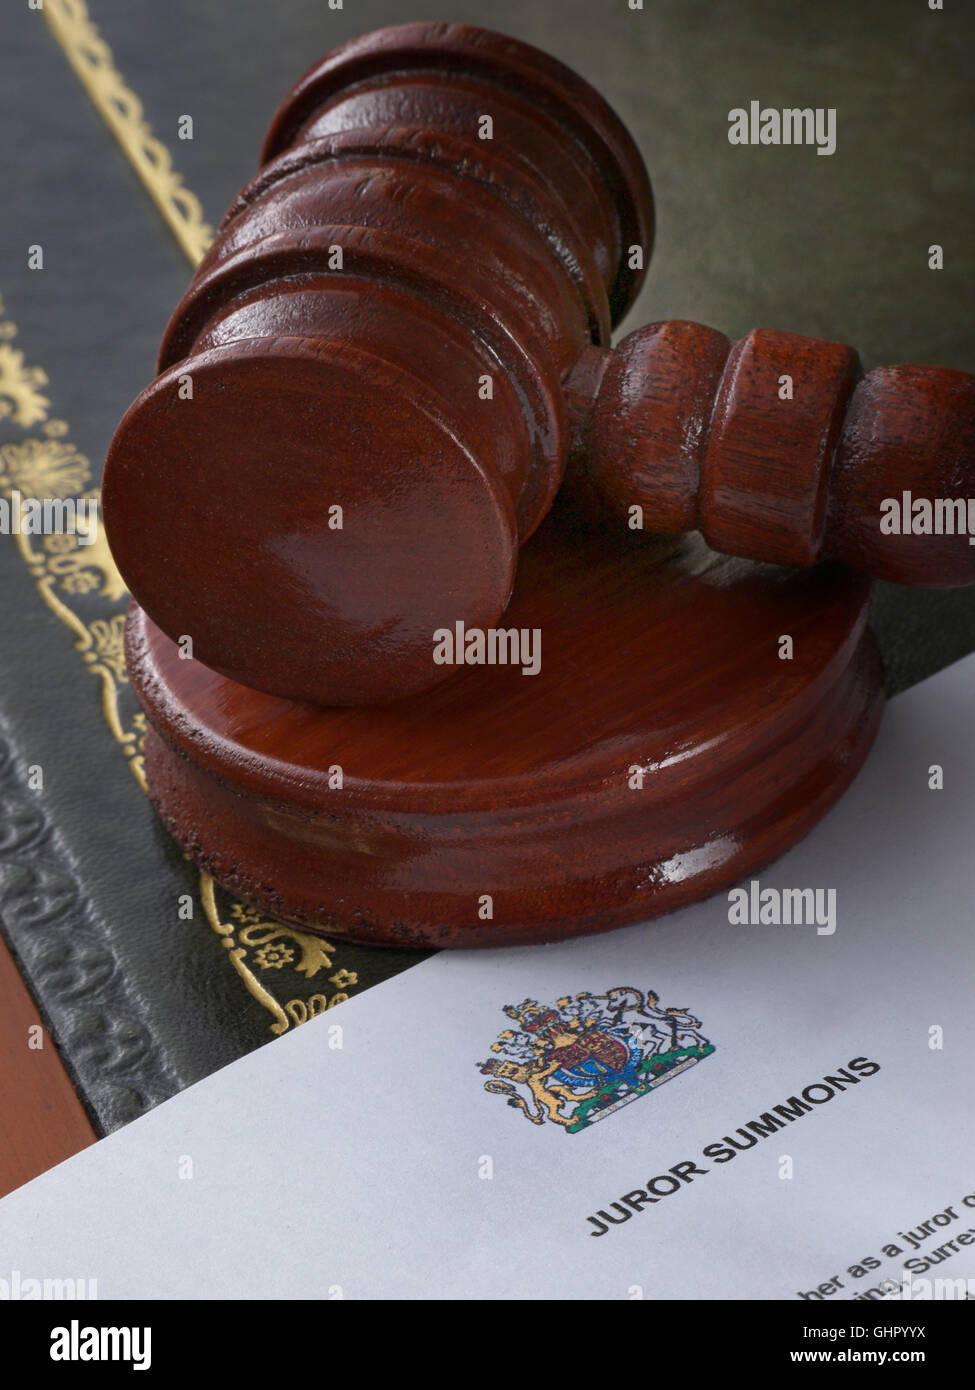 JUROR JURY SUMMONS LETTER Legal concept with Judges Gavel on Jury service Summons letter Stock Photo